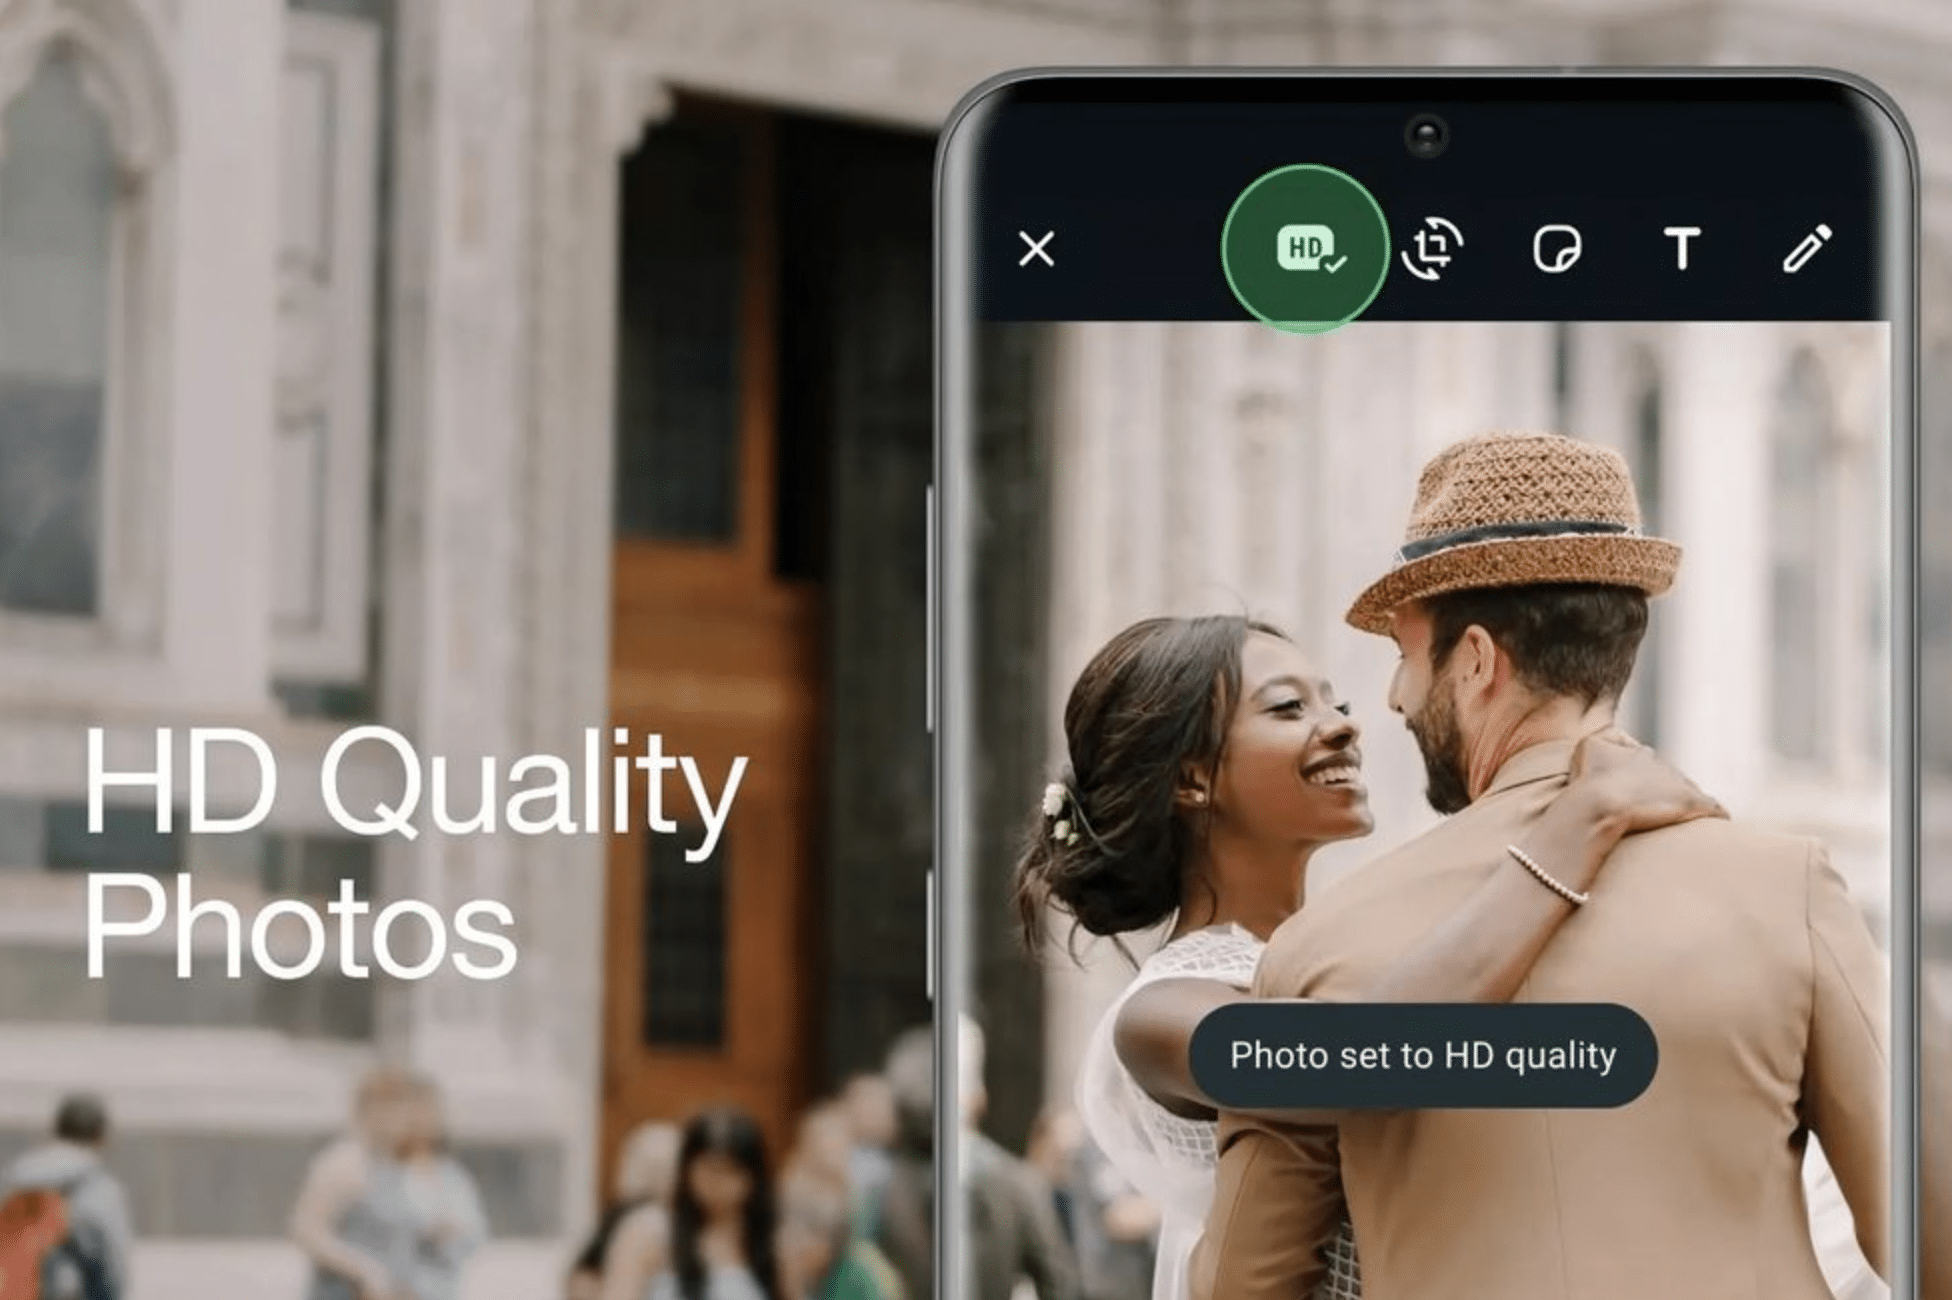 WhatsApp Gets Support for High-Resolution Images